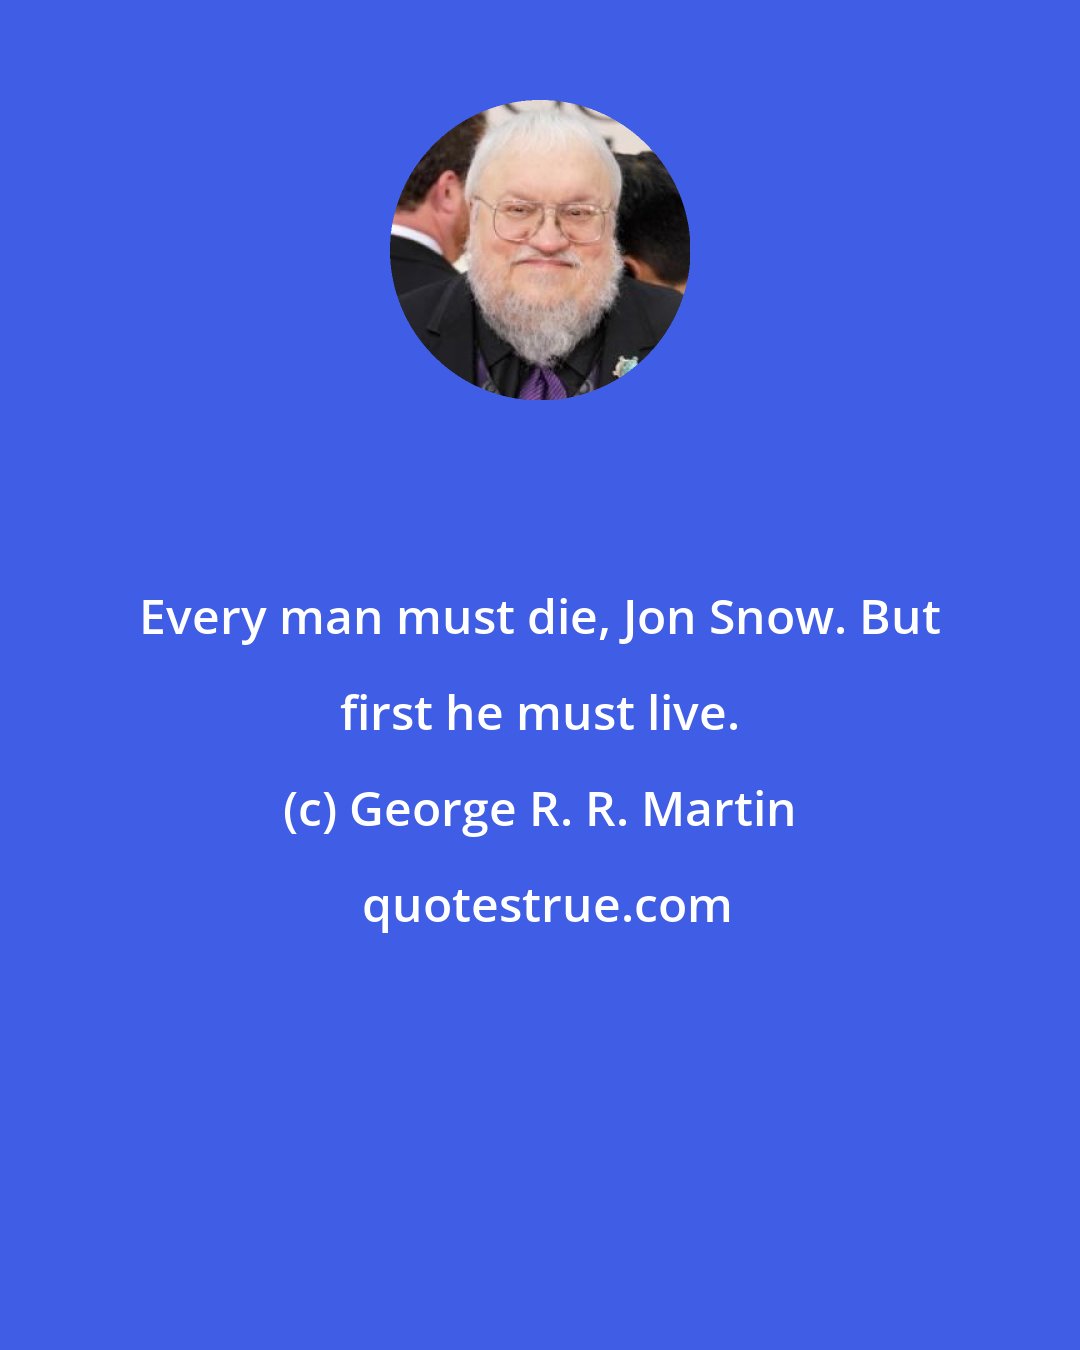 George R. R. Martin: Every man must die, Jon Snow. But first he must live.